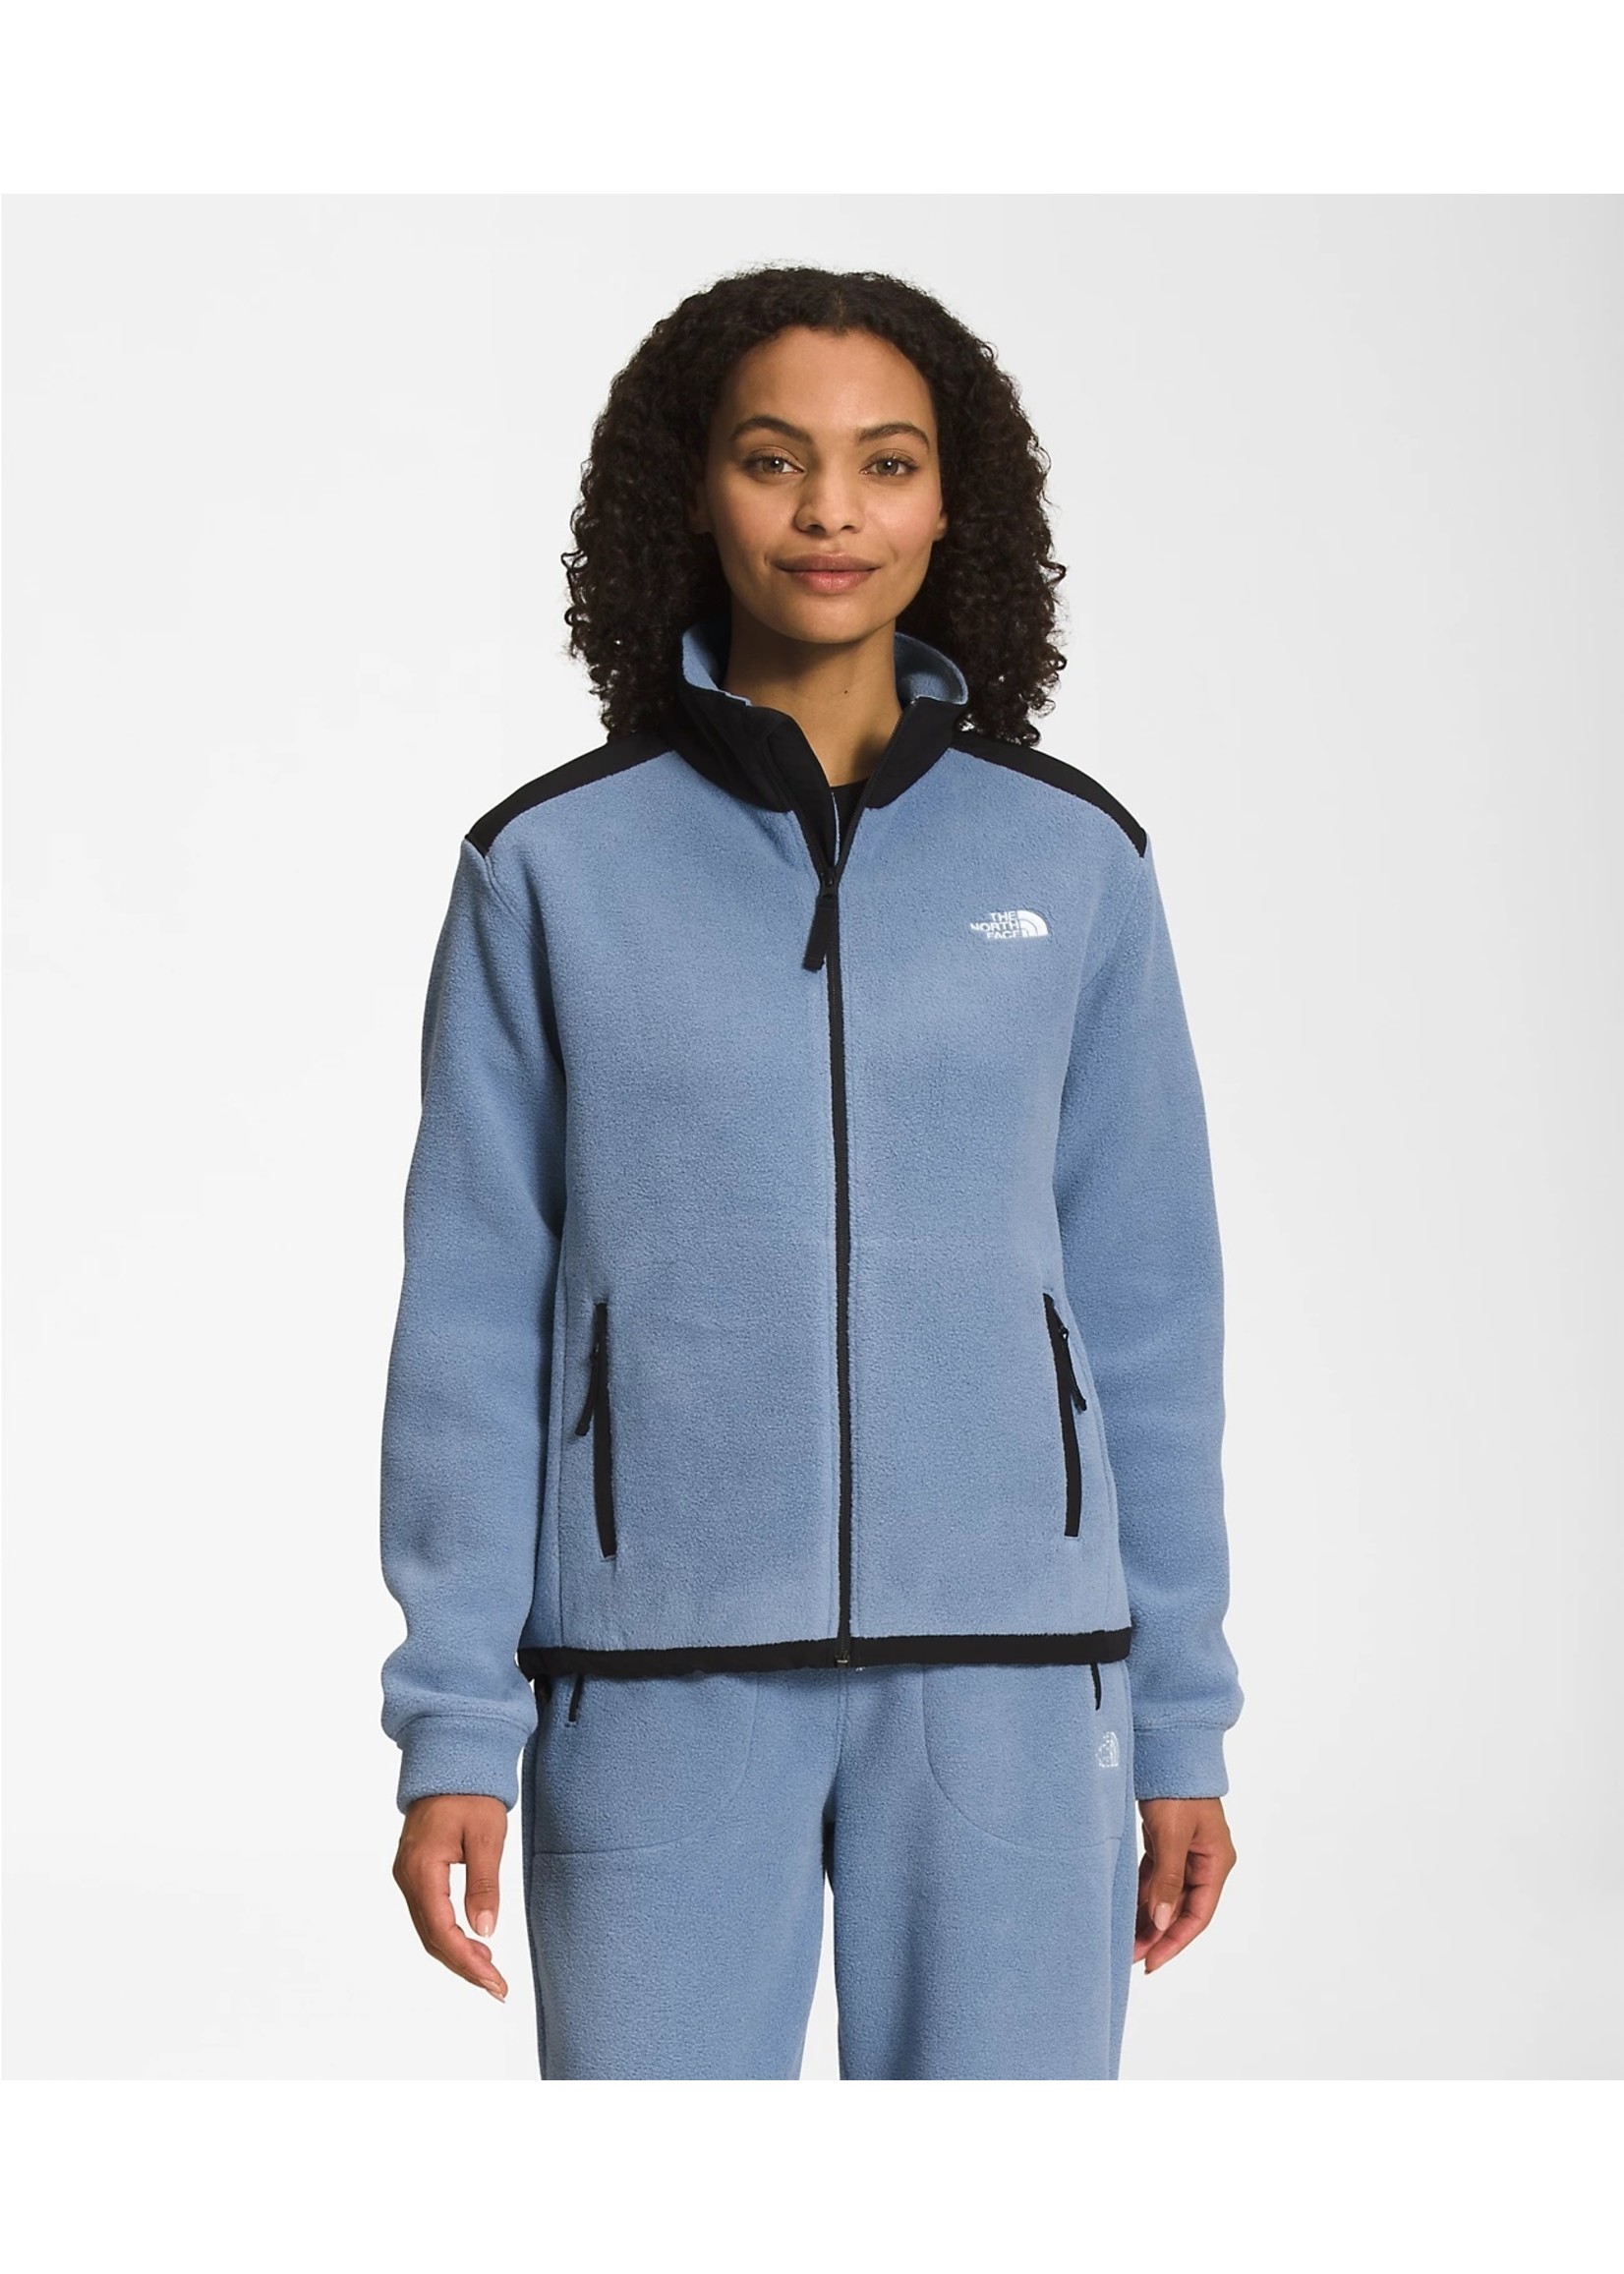 The North Face Womens Alpine 200 Full-Zip Jacket